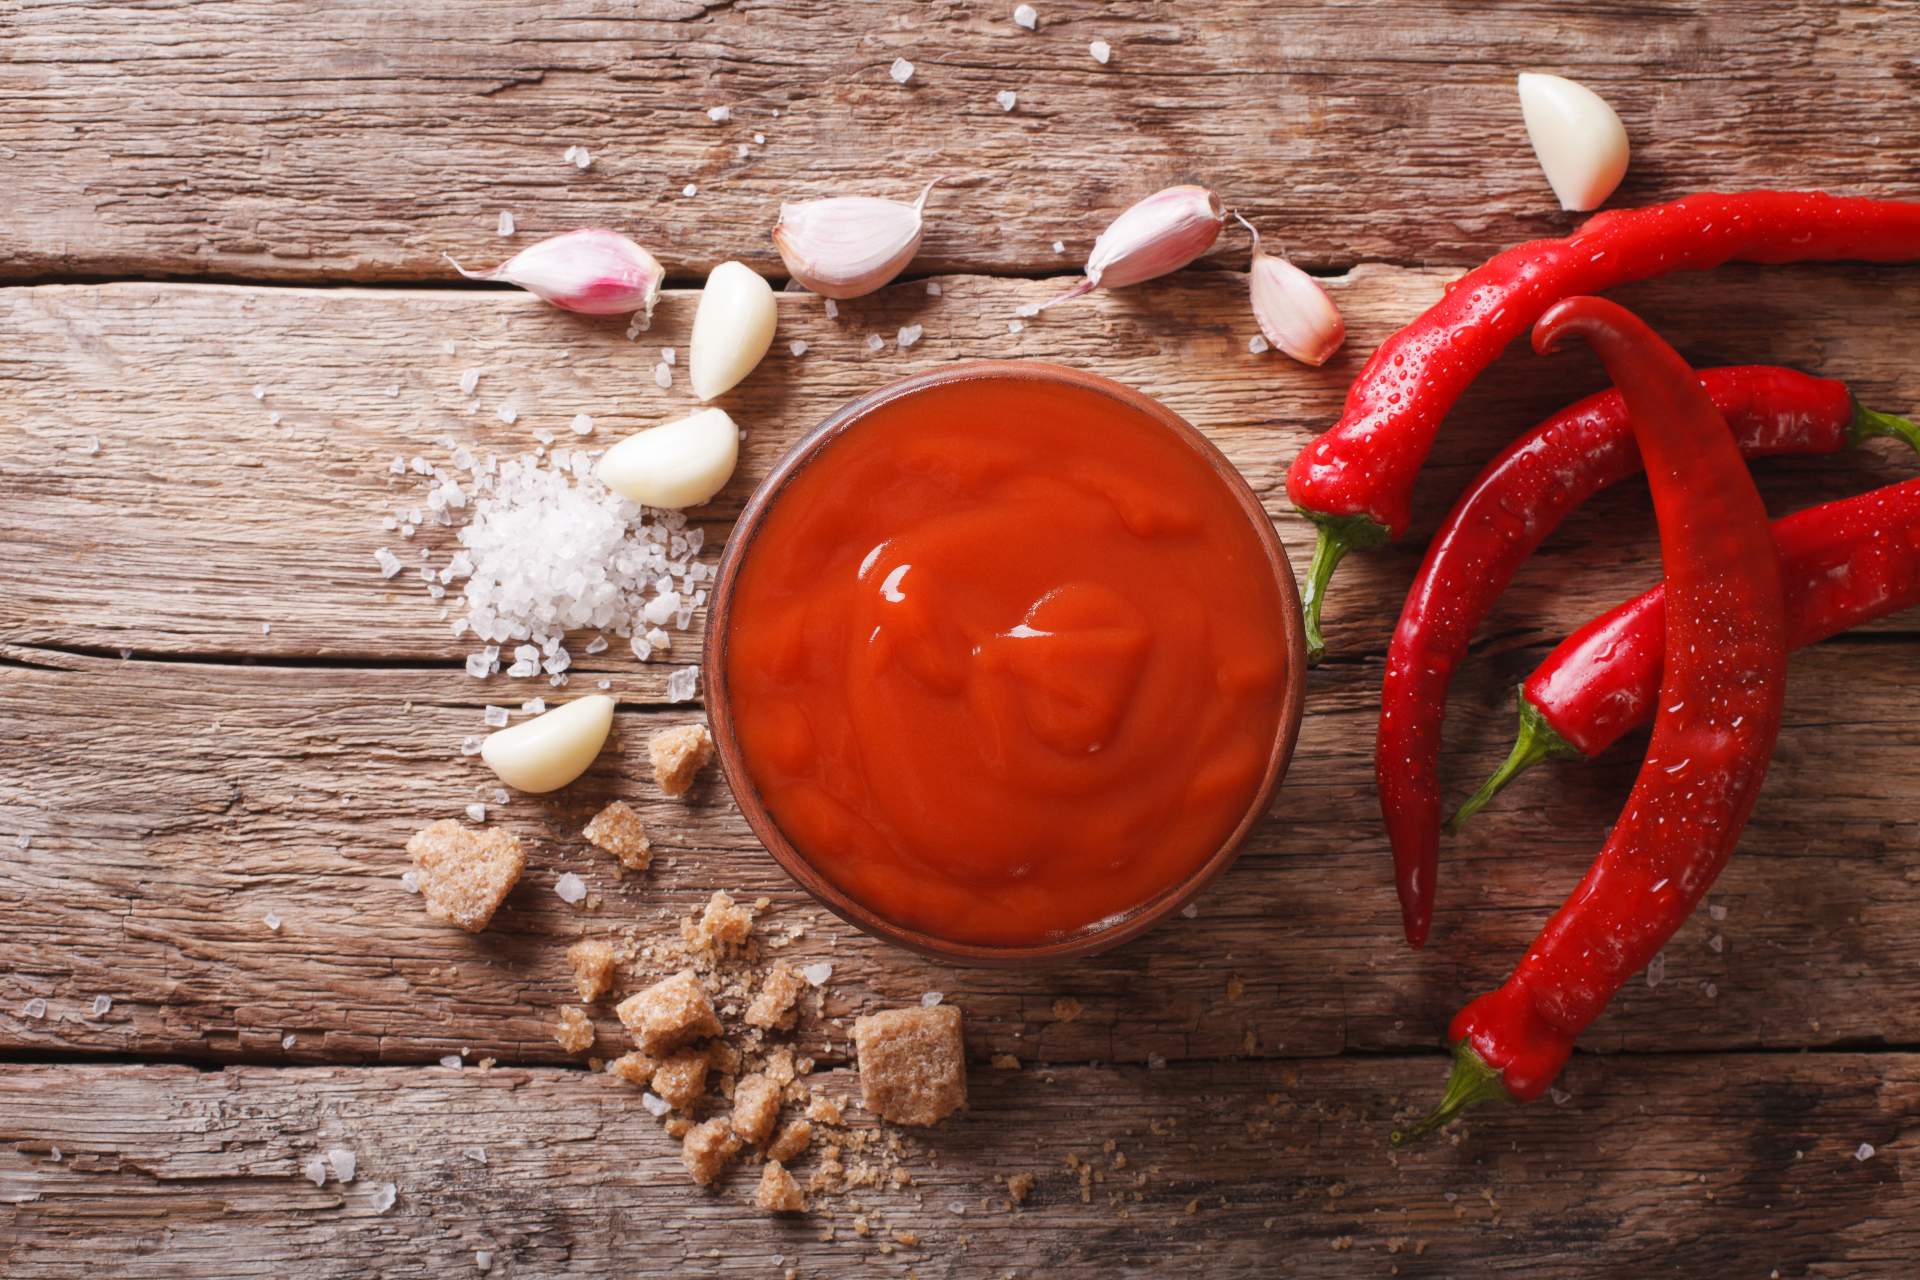 What is Sriracha spice made of?